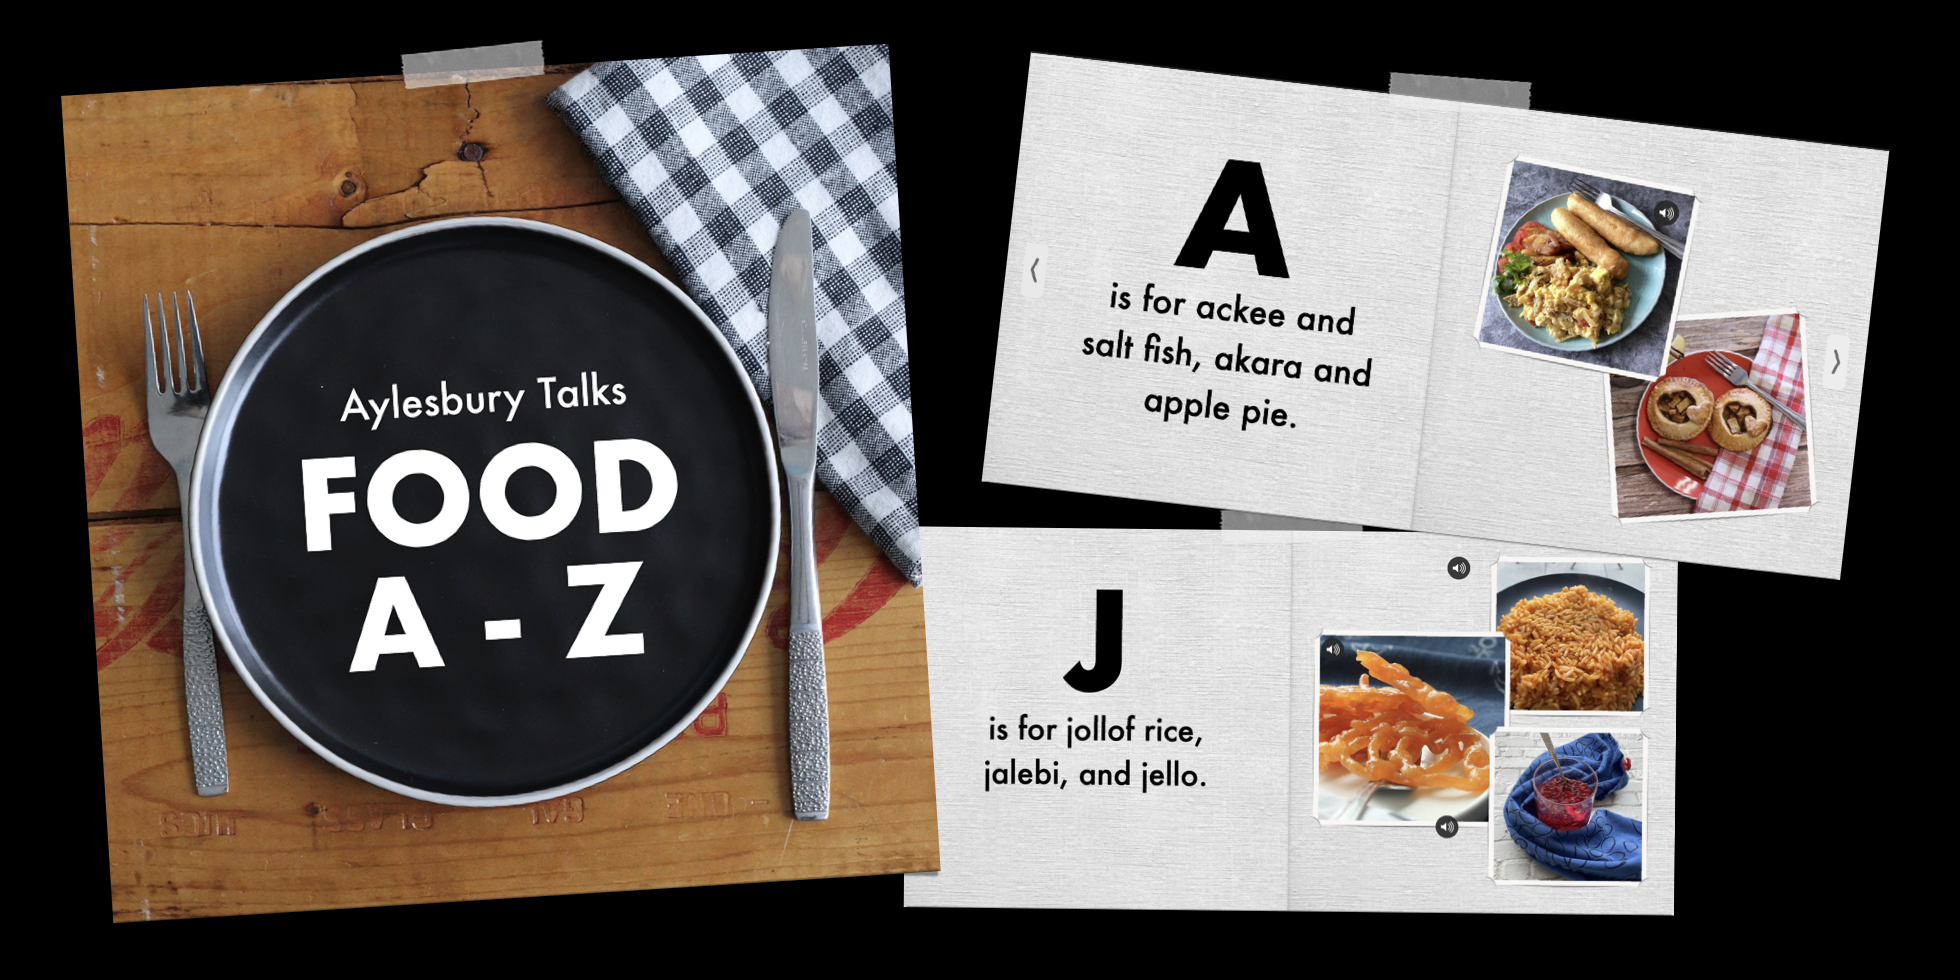 A collage including the cover of the Aylesbury Talks Food A to Z book and two page layouts for the letter A and J. 